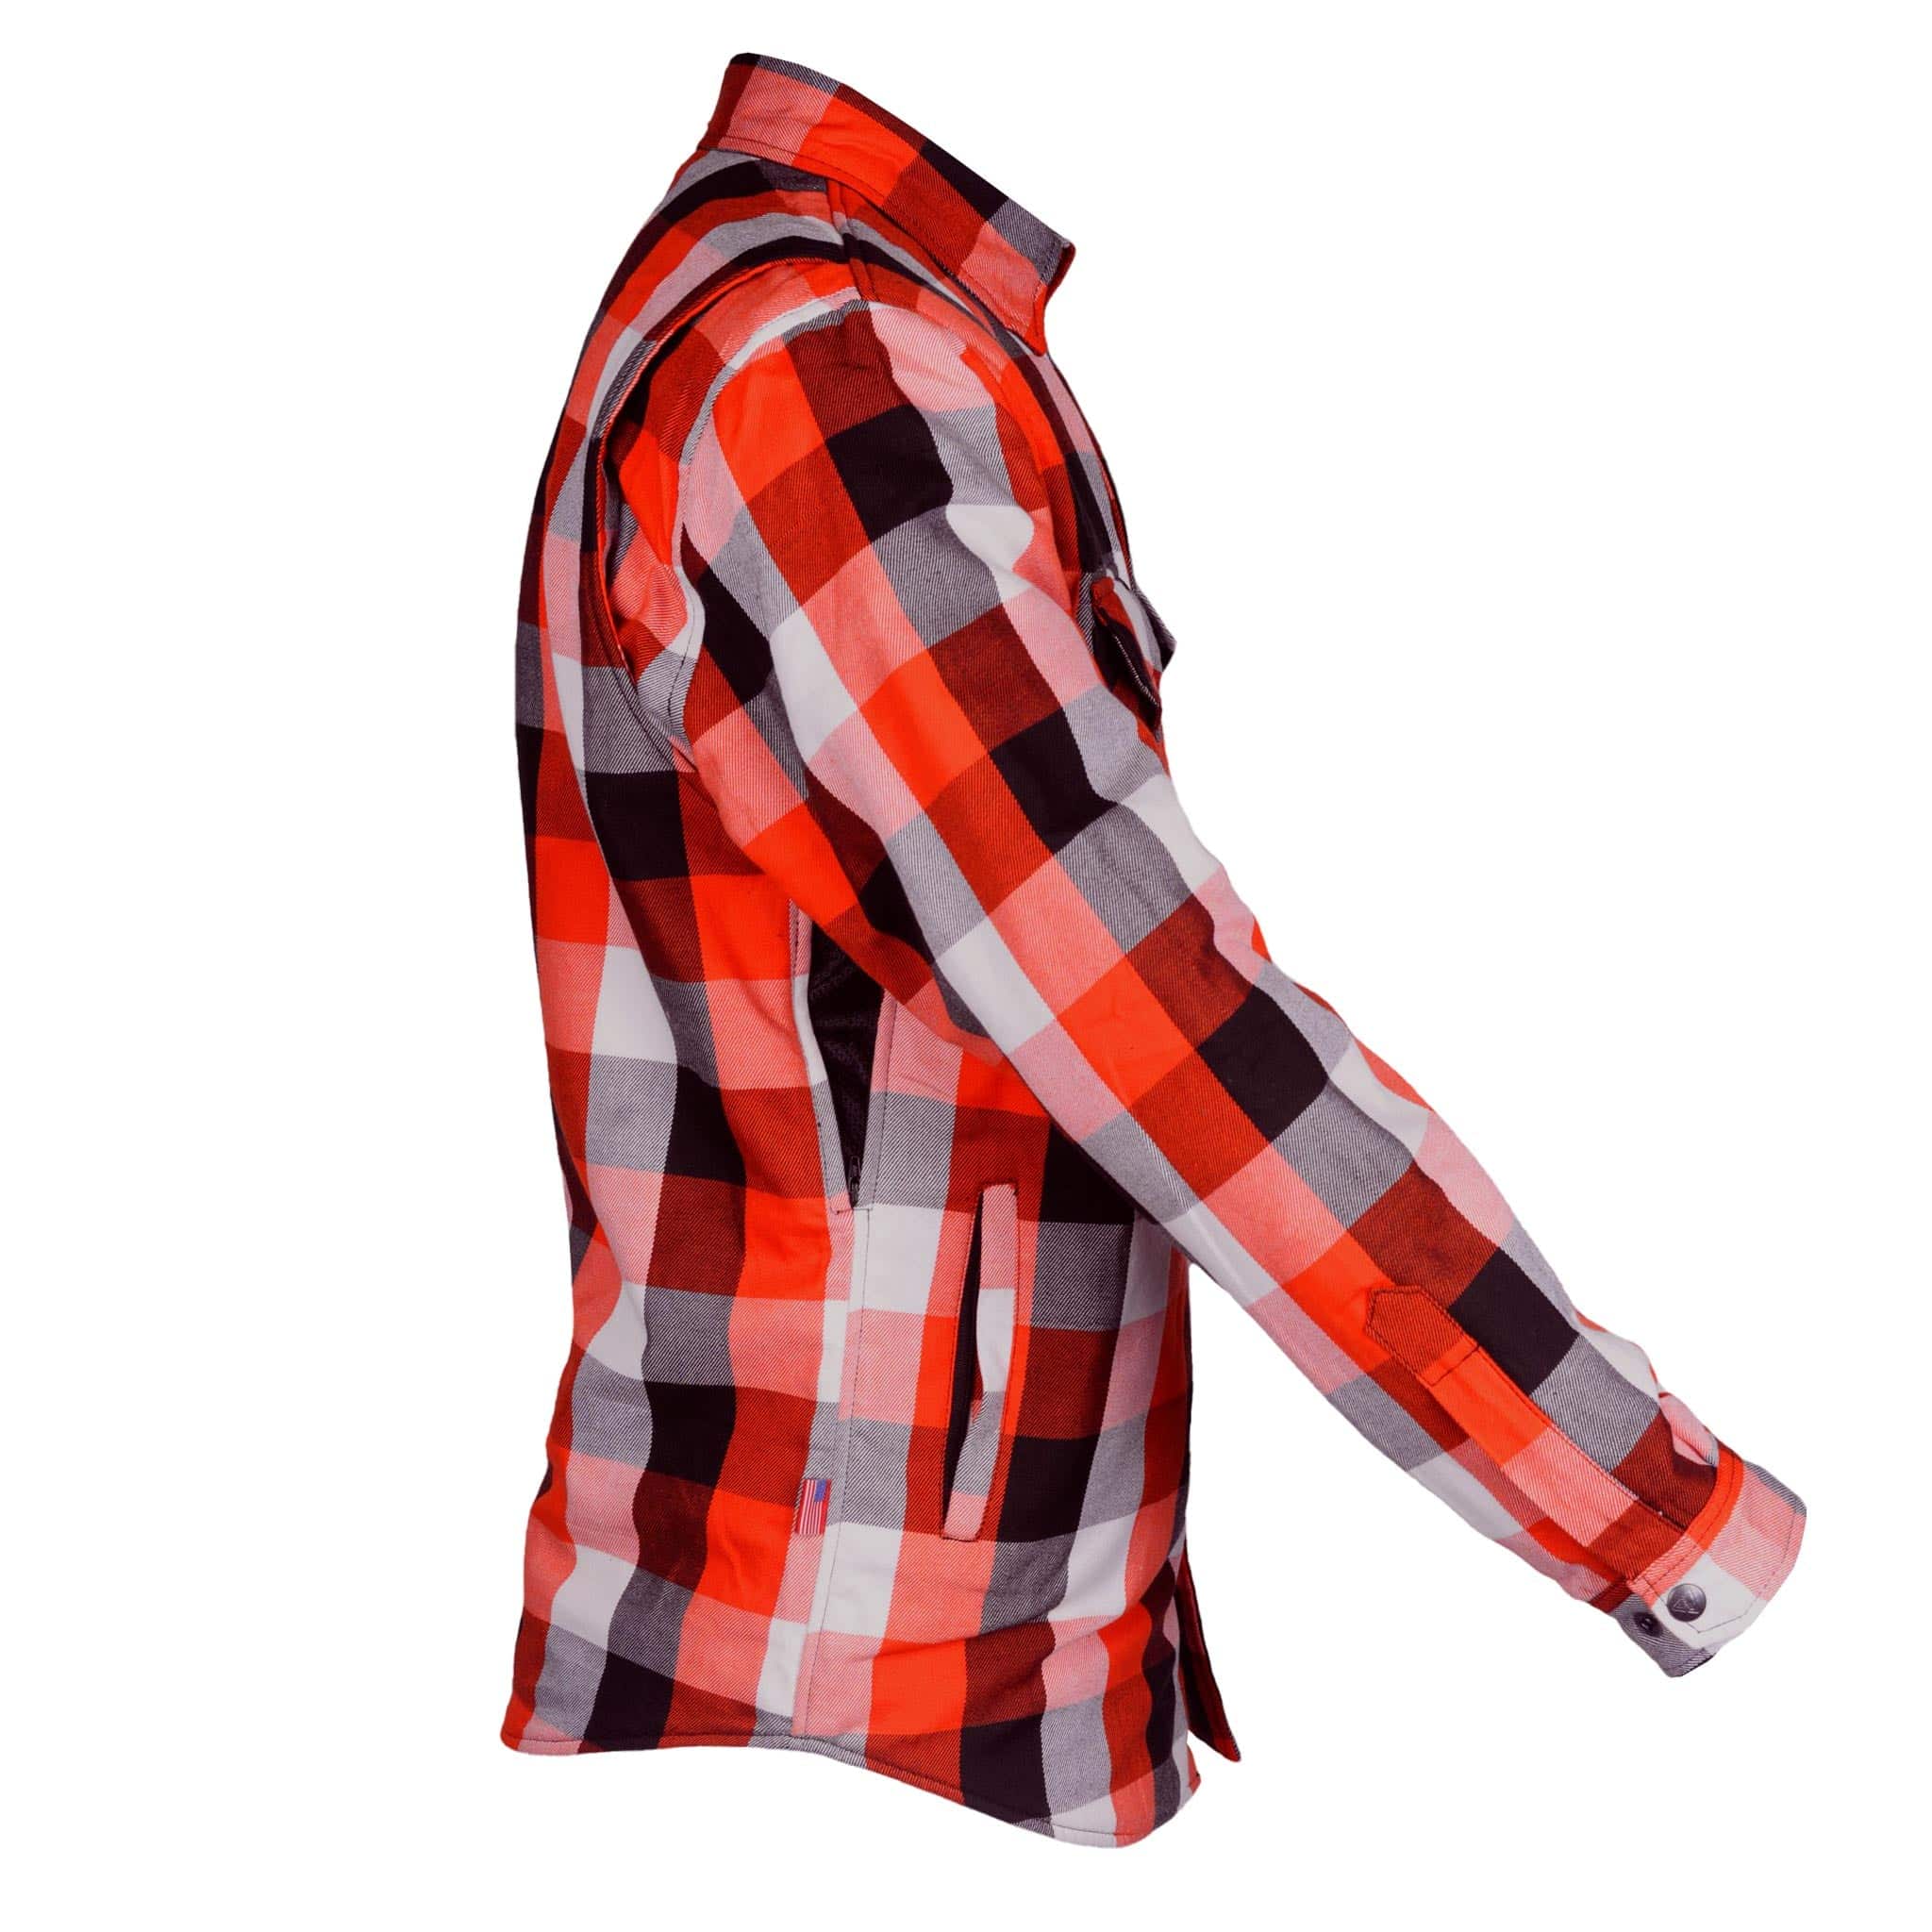 Protective Flannel Shirt "American Dream"  - Red, Black, White Checkered